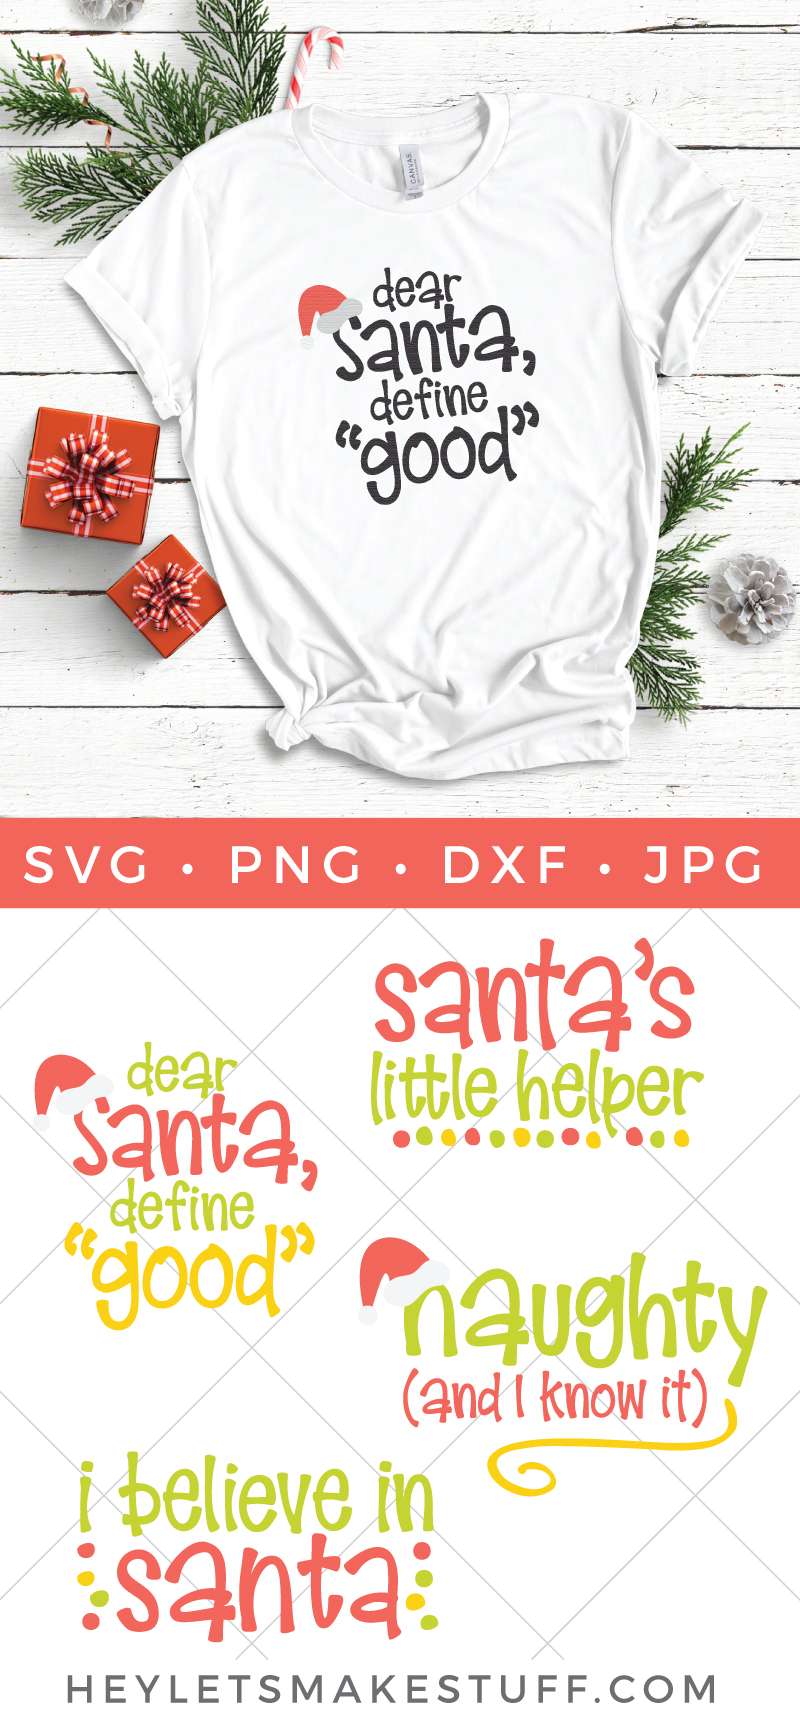 A close up of a white shirt lying next to Christmas decor and decorated with a design that says, "Dear Santa, Define "Good'" and images of four cut files that say, ""Dear Santa, define "Good'", "Santa's Little Helper", "Naughty (and I know it)" and "I Believe in Santa" with advertising from HEYLETSMAKESTUFF.COM